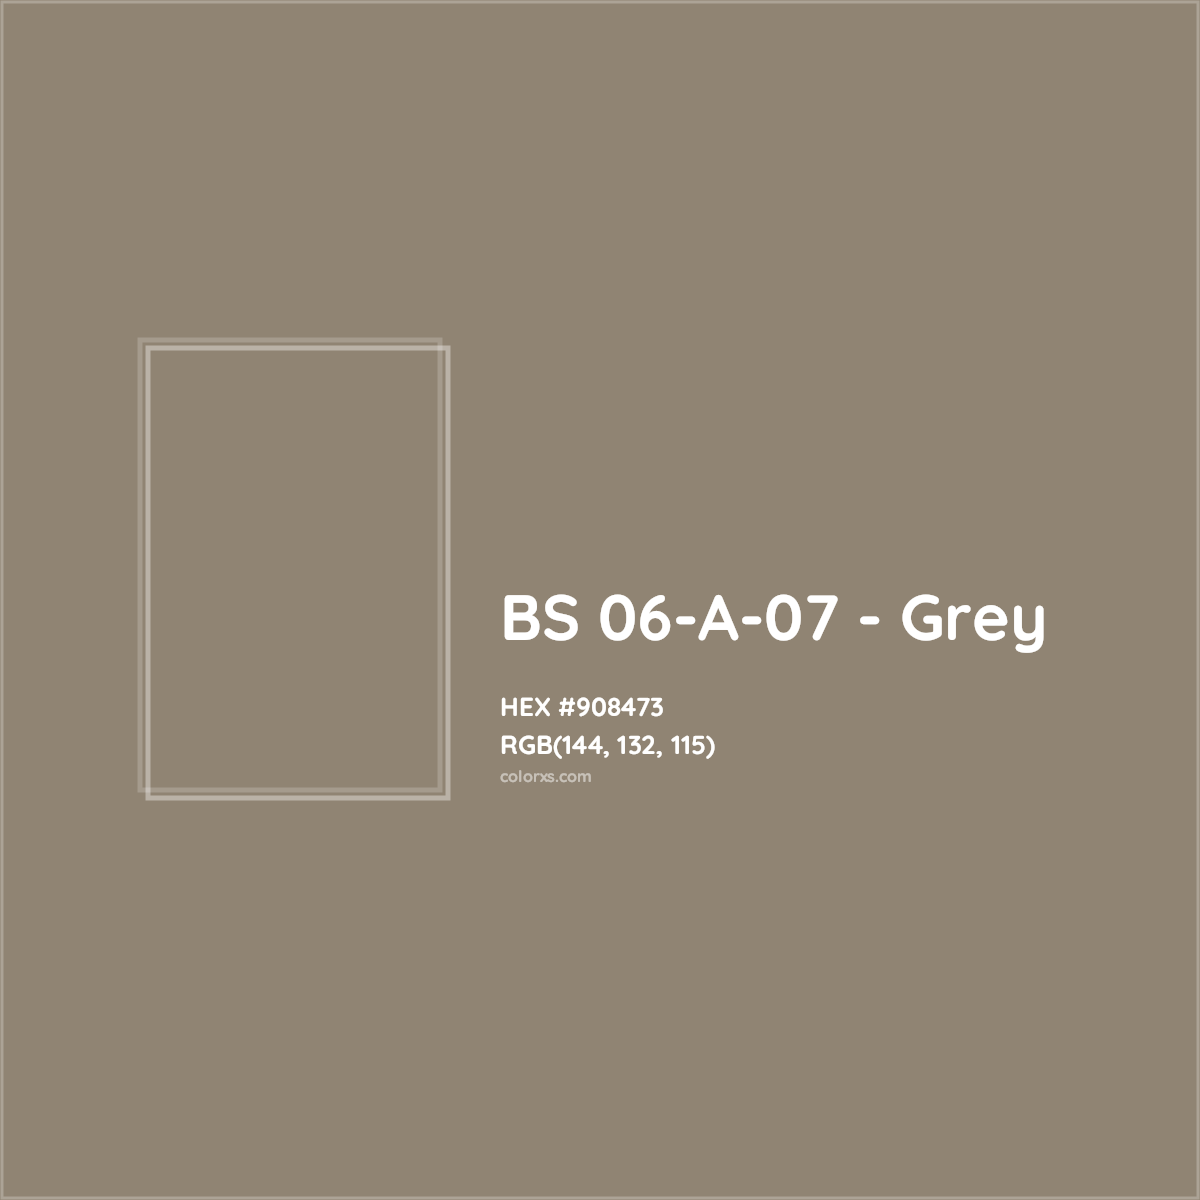 HEX #908473 BS 06-A-07 - Grey CMS British Standard 4800 - Color Code